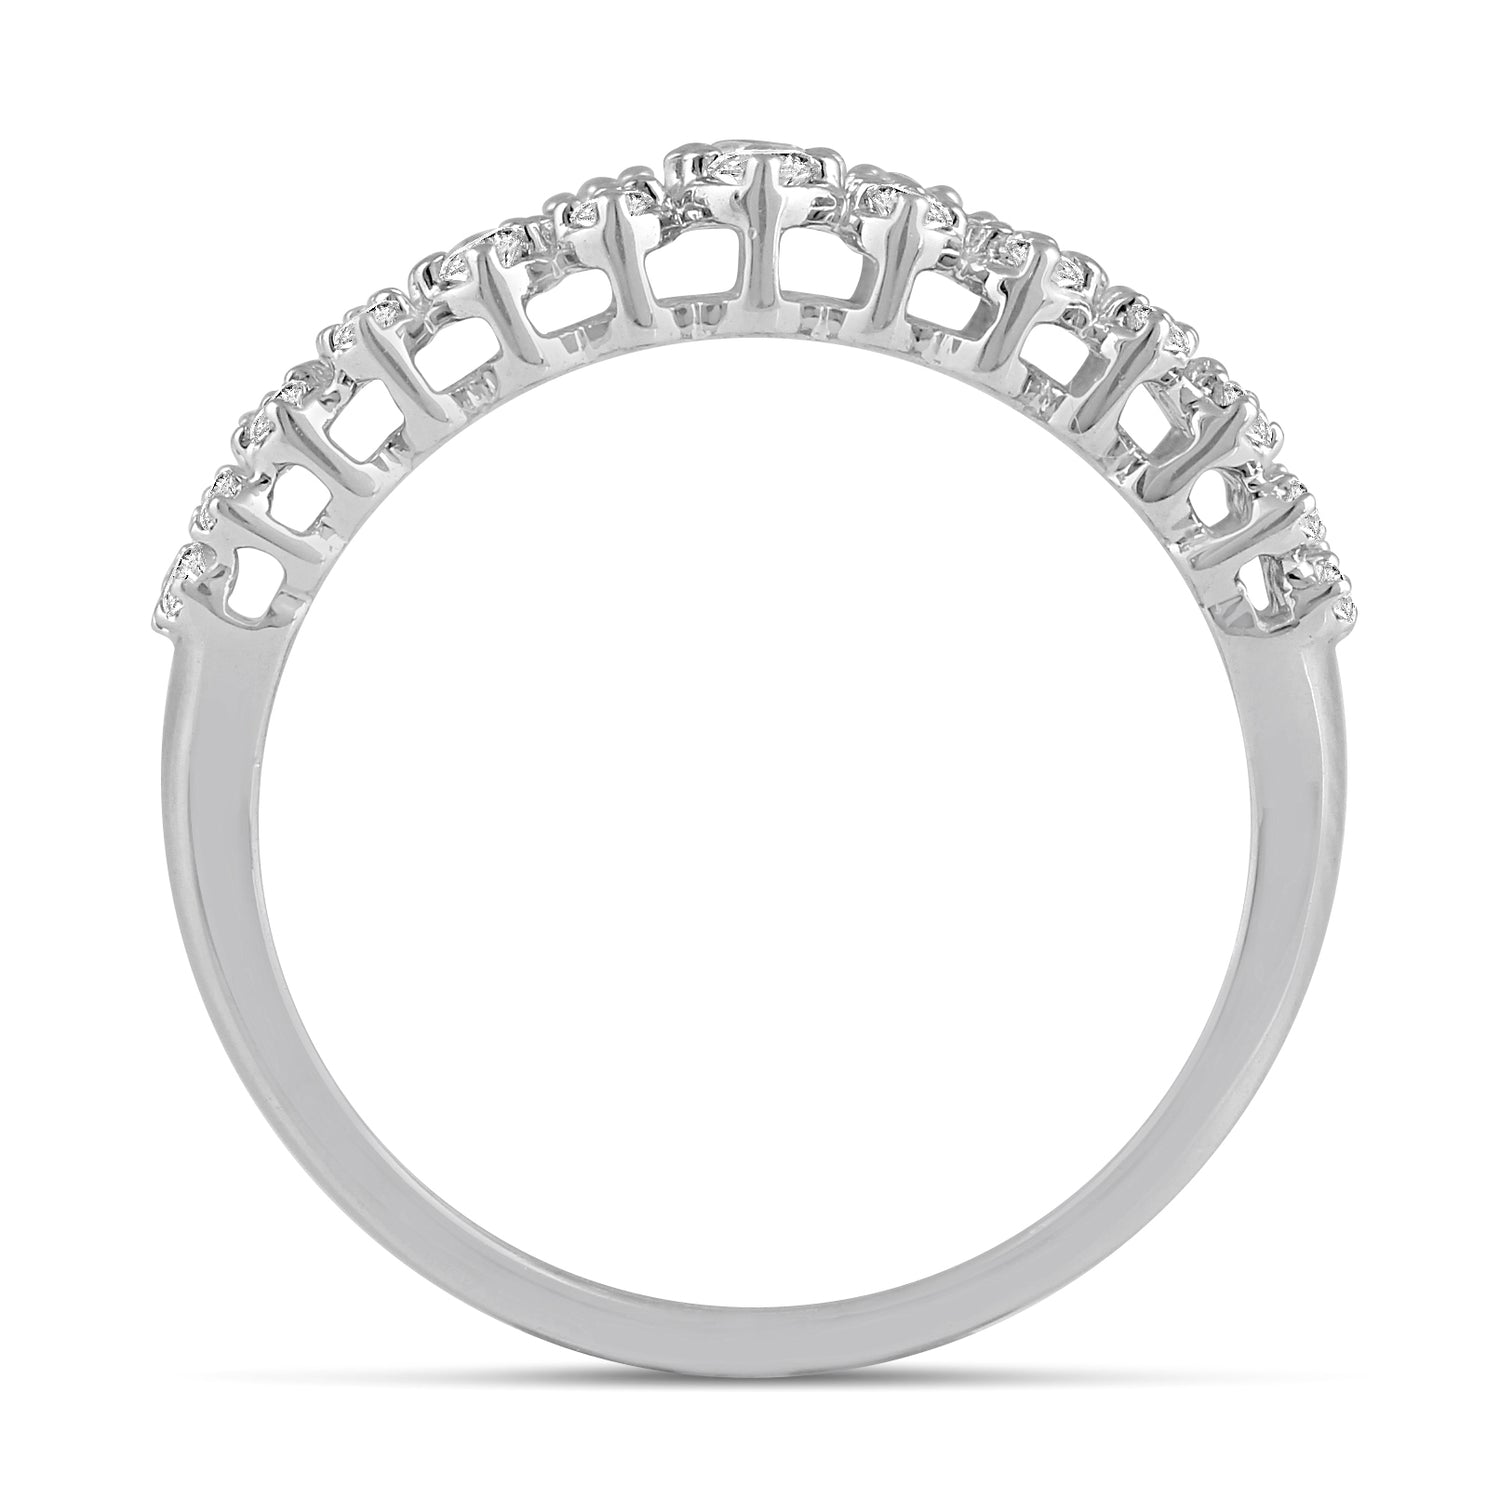 1.0CT TW Diamond Anniversary Ring in Sterling Silver bridal engagement